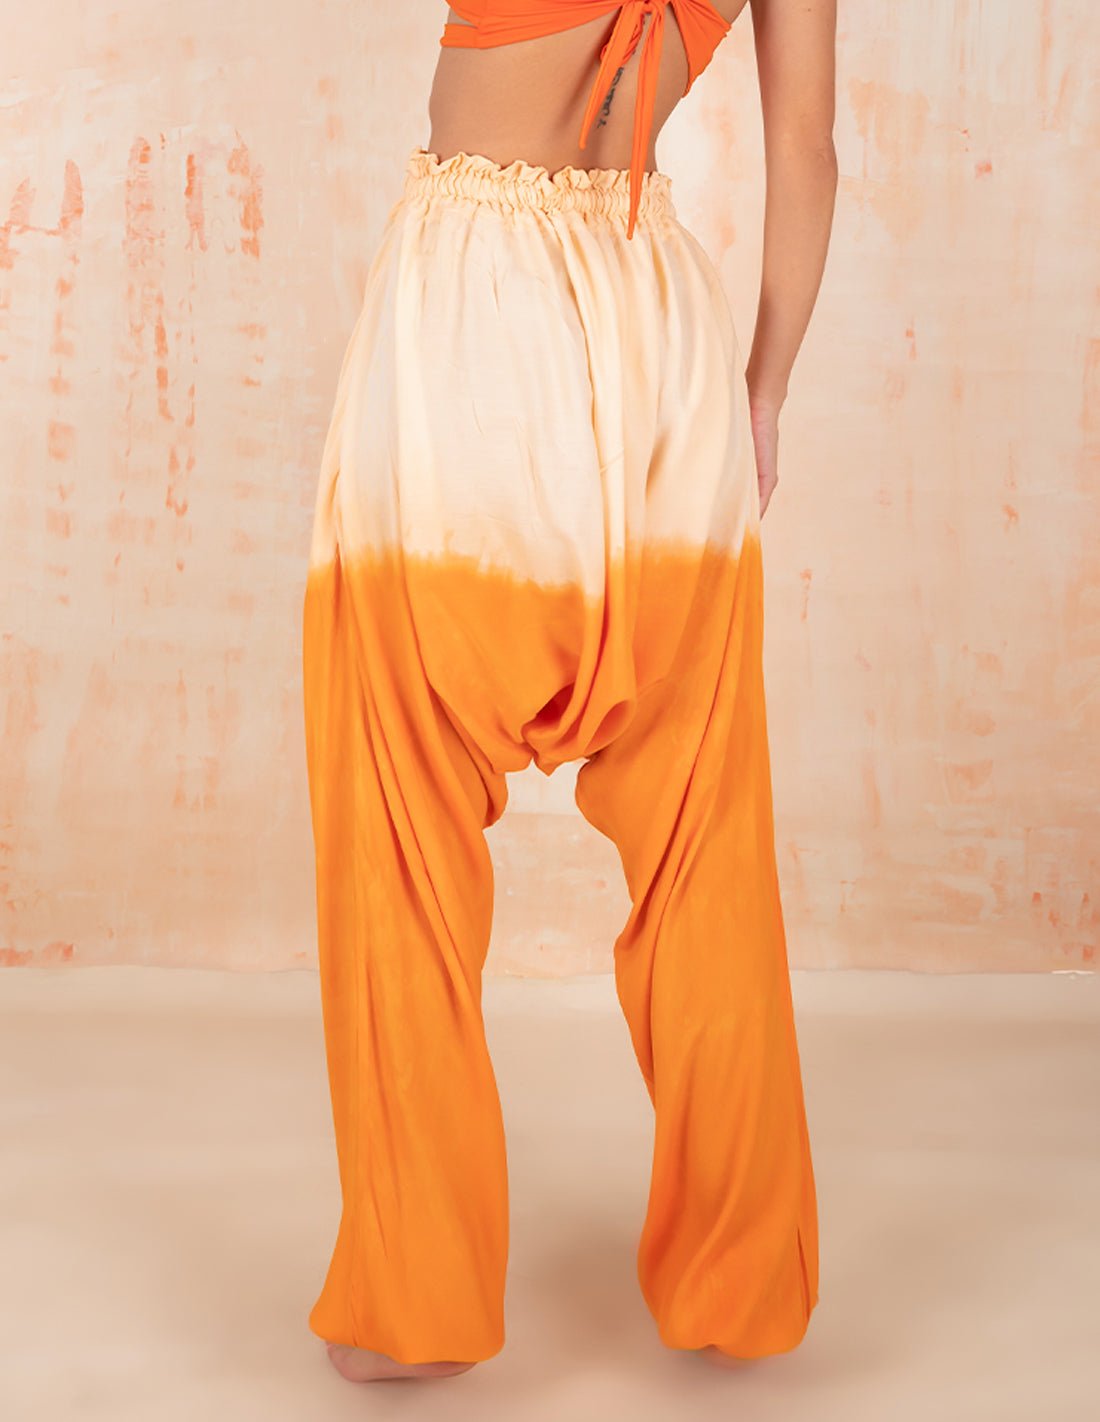 Flemish Pant Faded Tangerine. Hand-Dyed Beach Pant In Faded Tangerine. Entreaguas